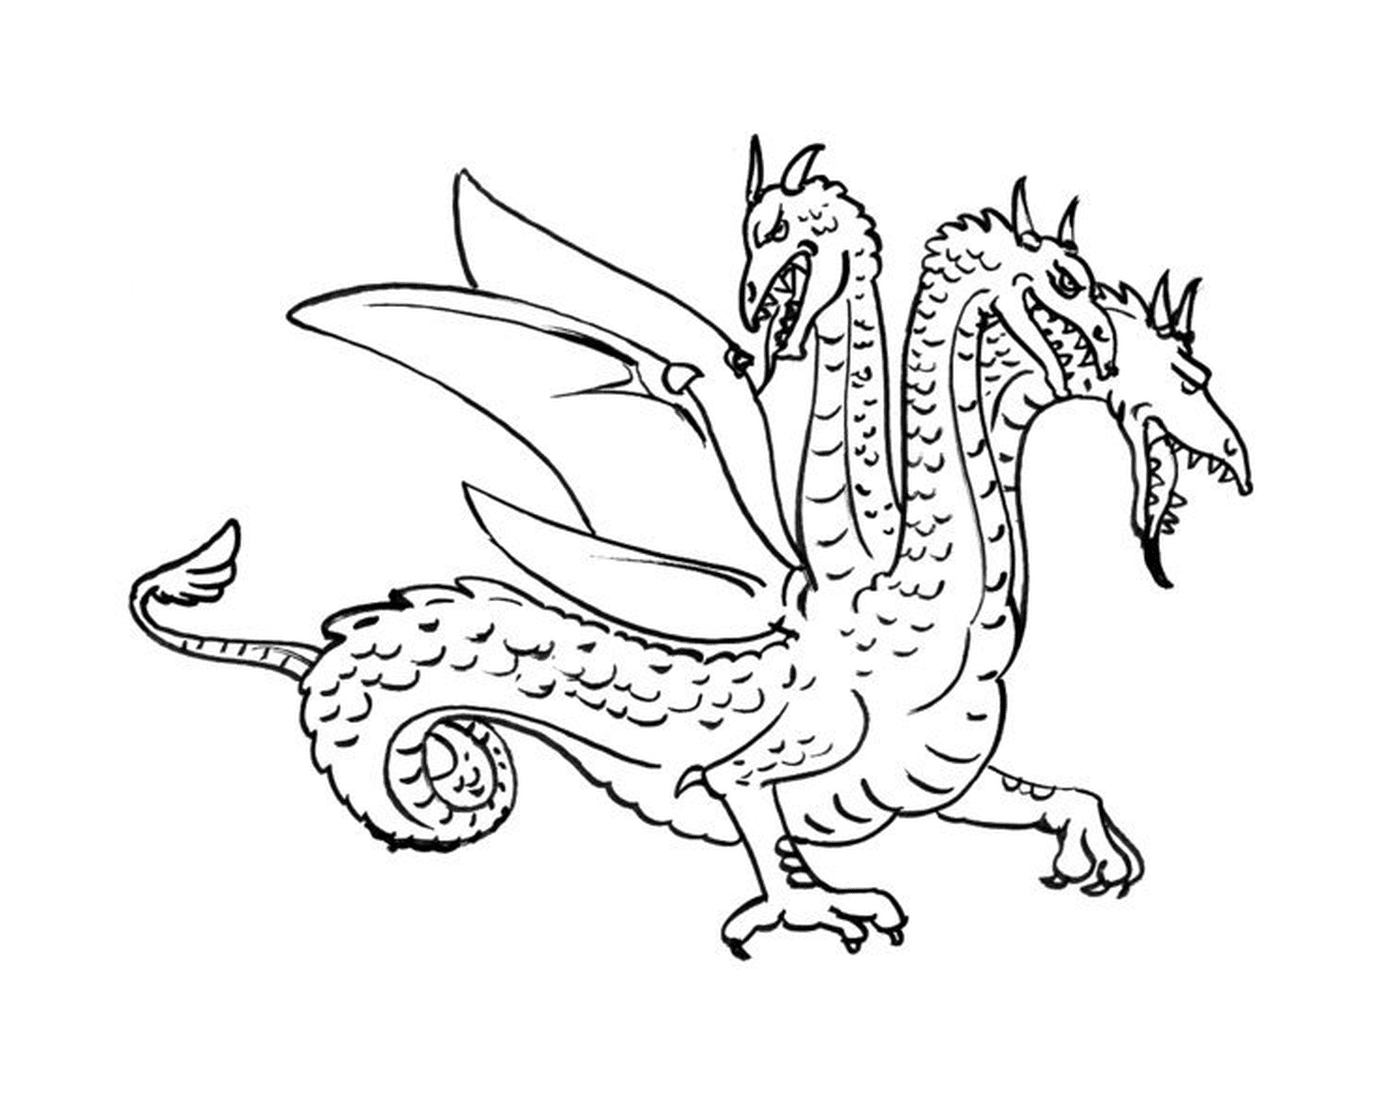  Dragon holding a sword with strength 